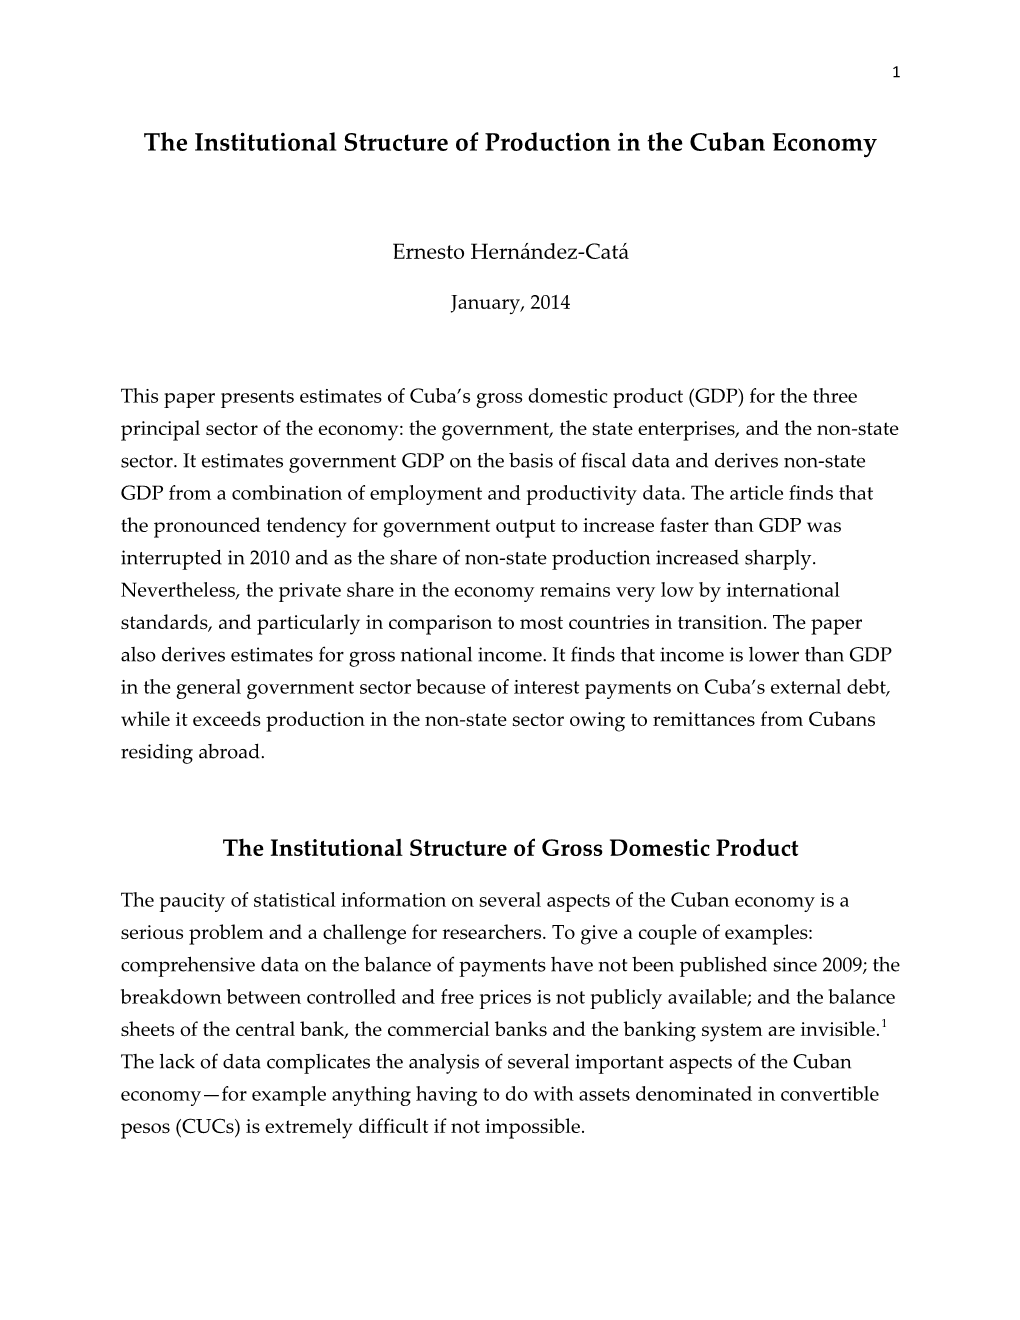 The Institutional Structure of Production in the Cuban Economy